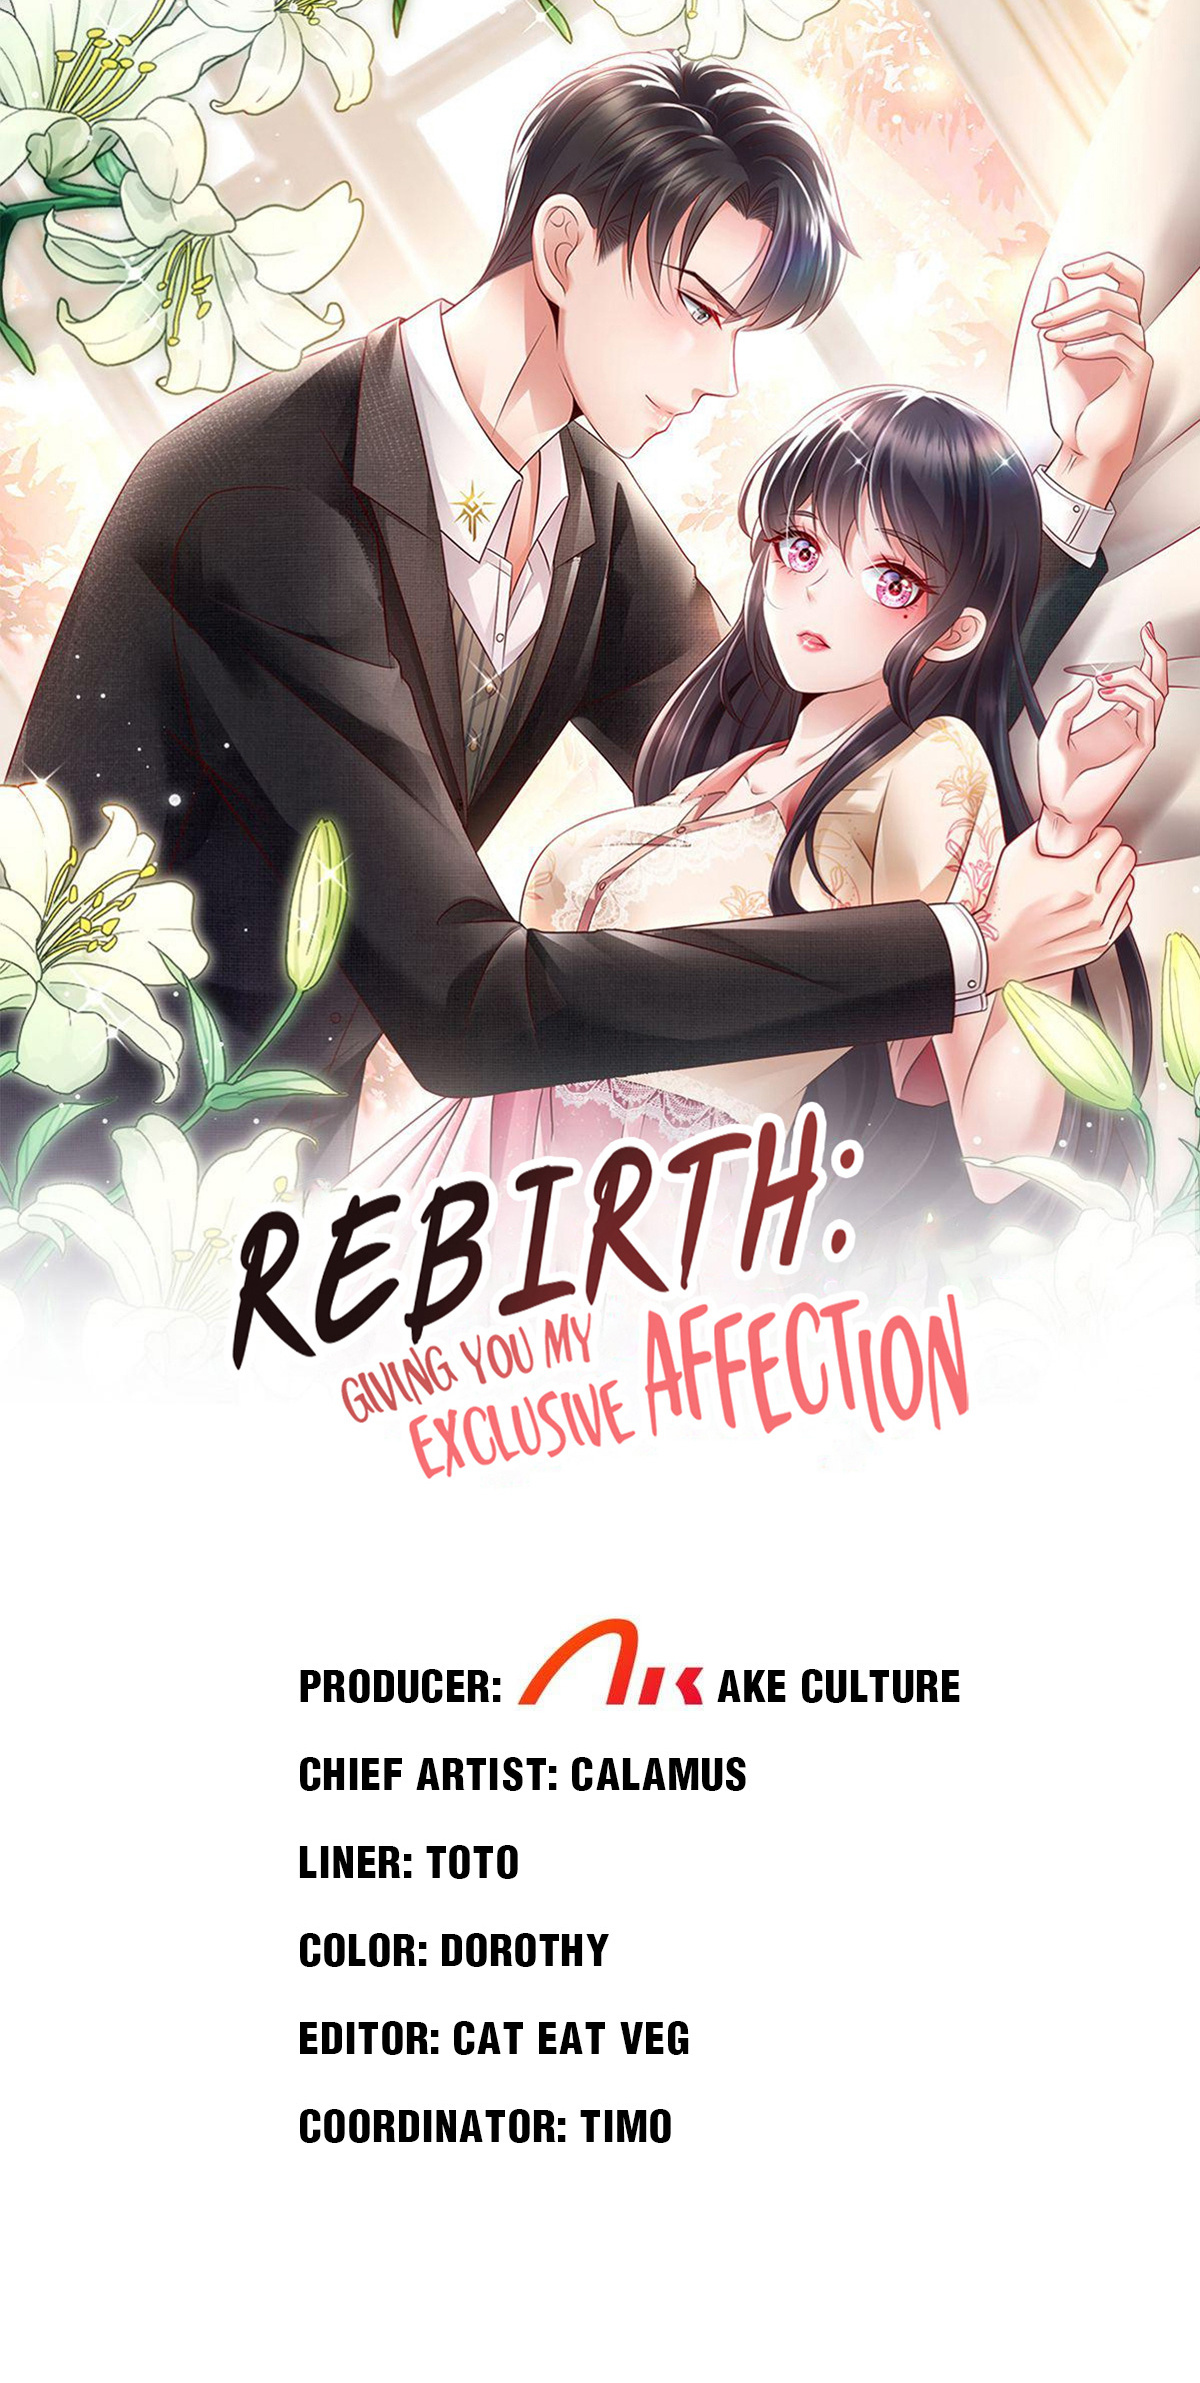 Rebirth: Giving You My Exclusive Affection 237